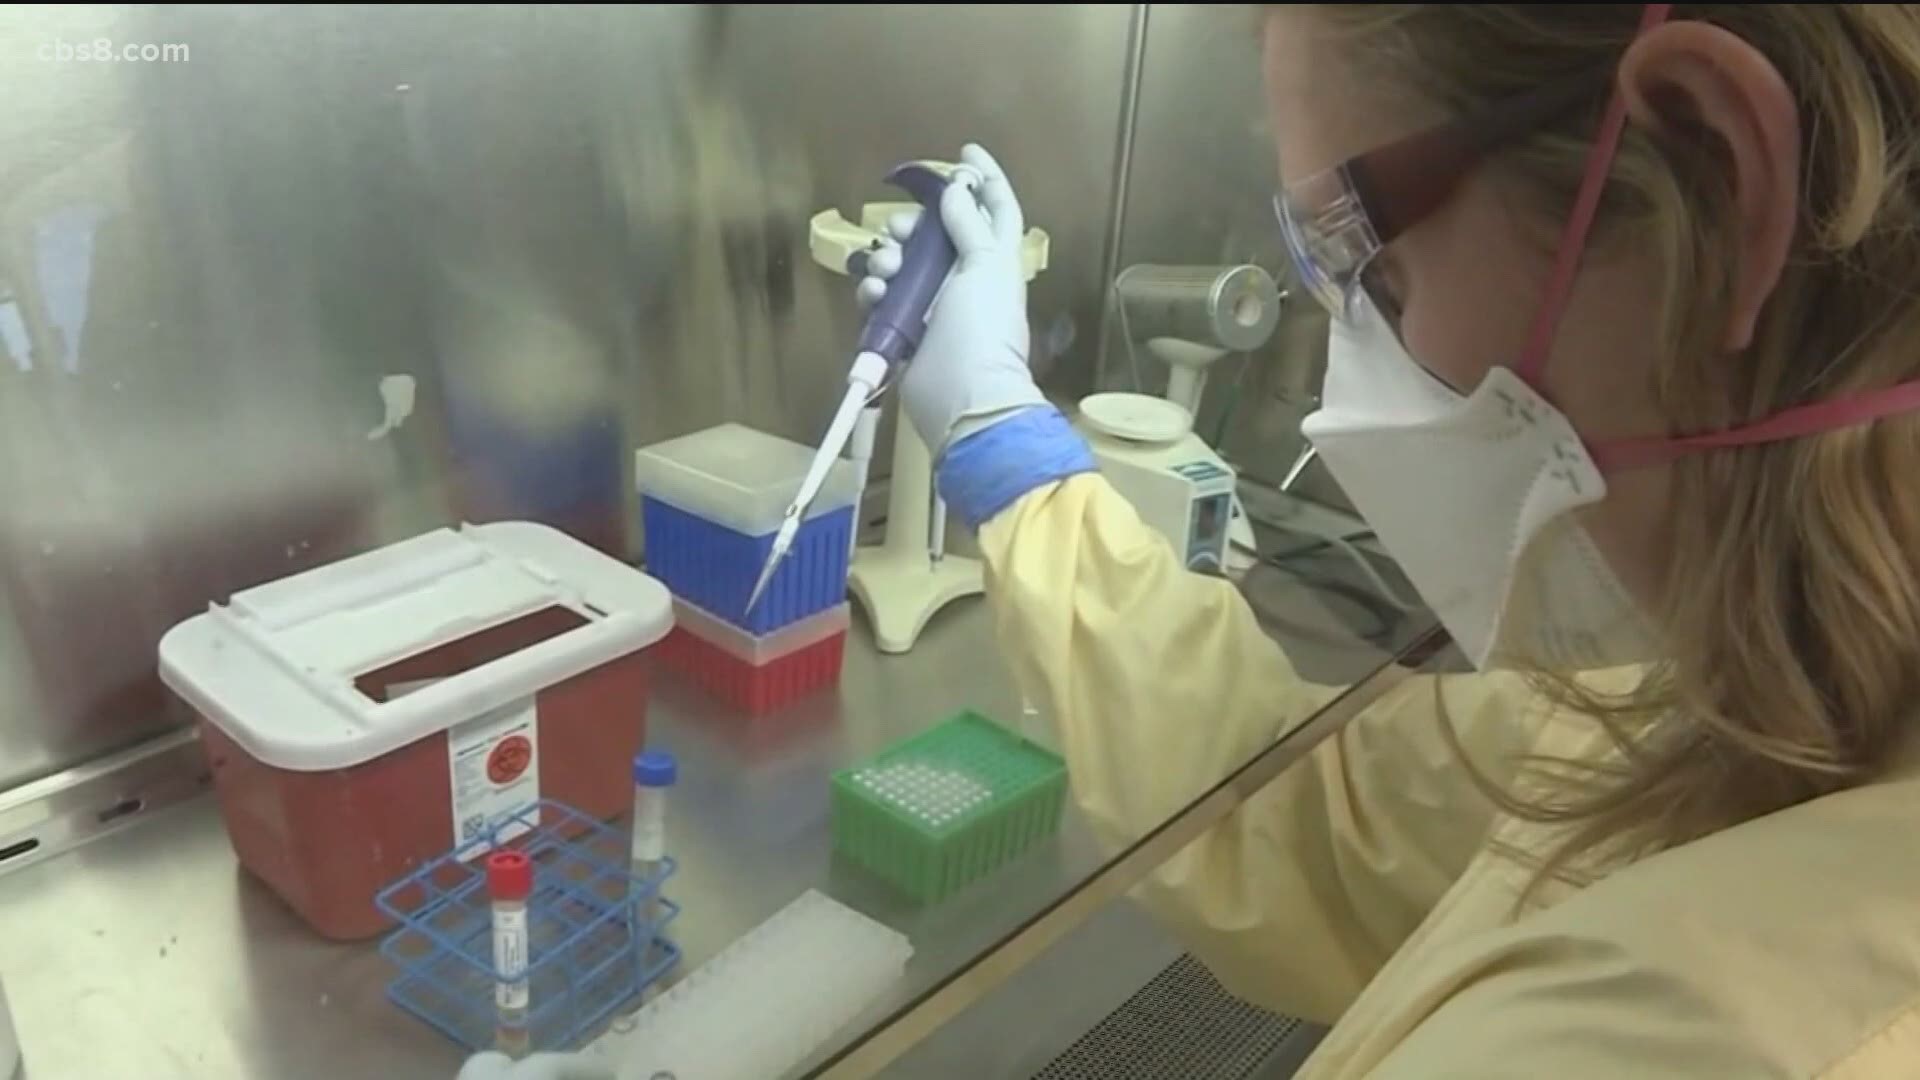 Multiple vaccine trials are underway in San Diego. News 8's Heather Hope spoke to a man who is in the Phase 3 Moderna trial, along with a UC San Diego expert.